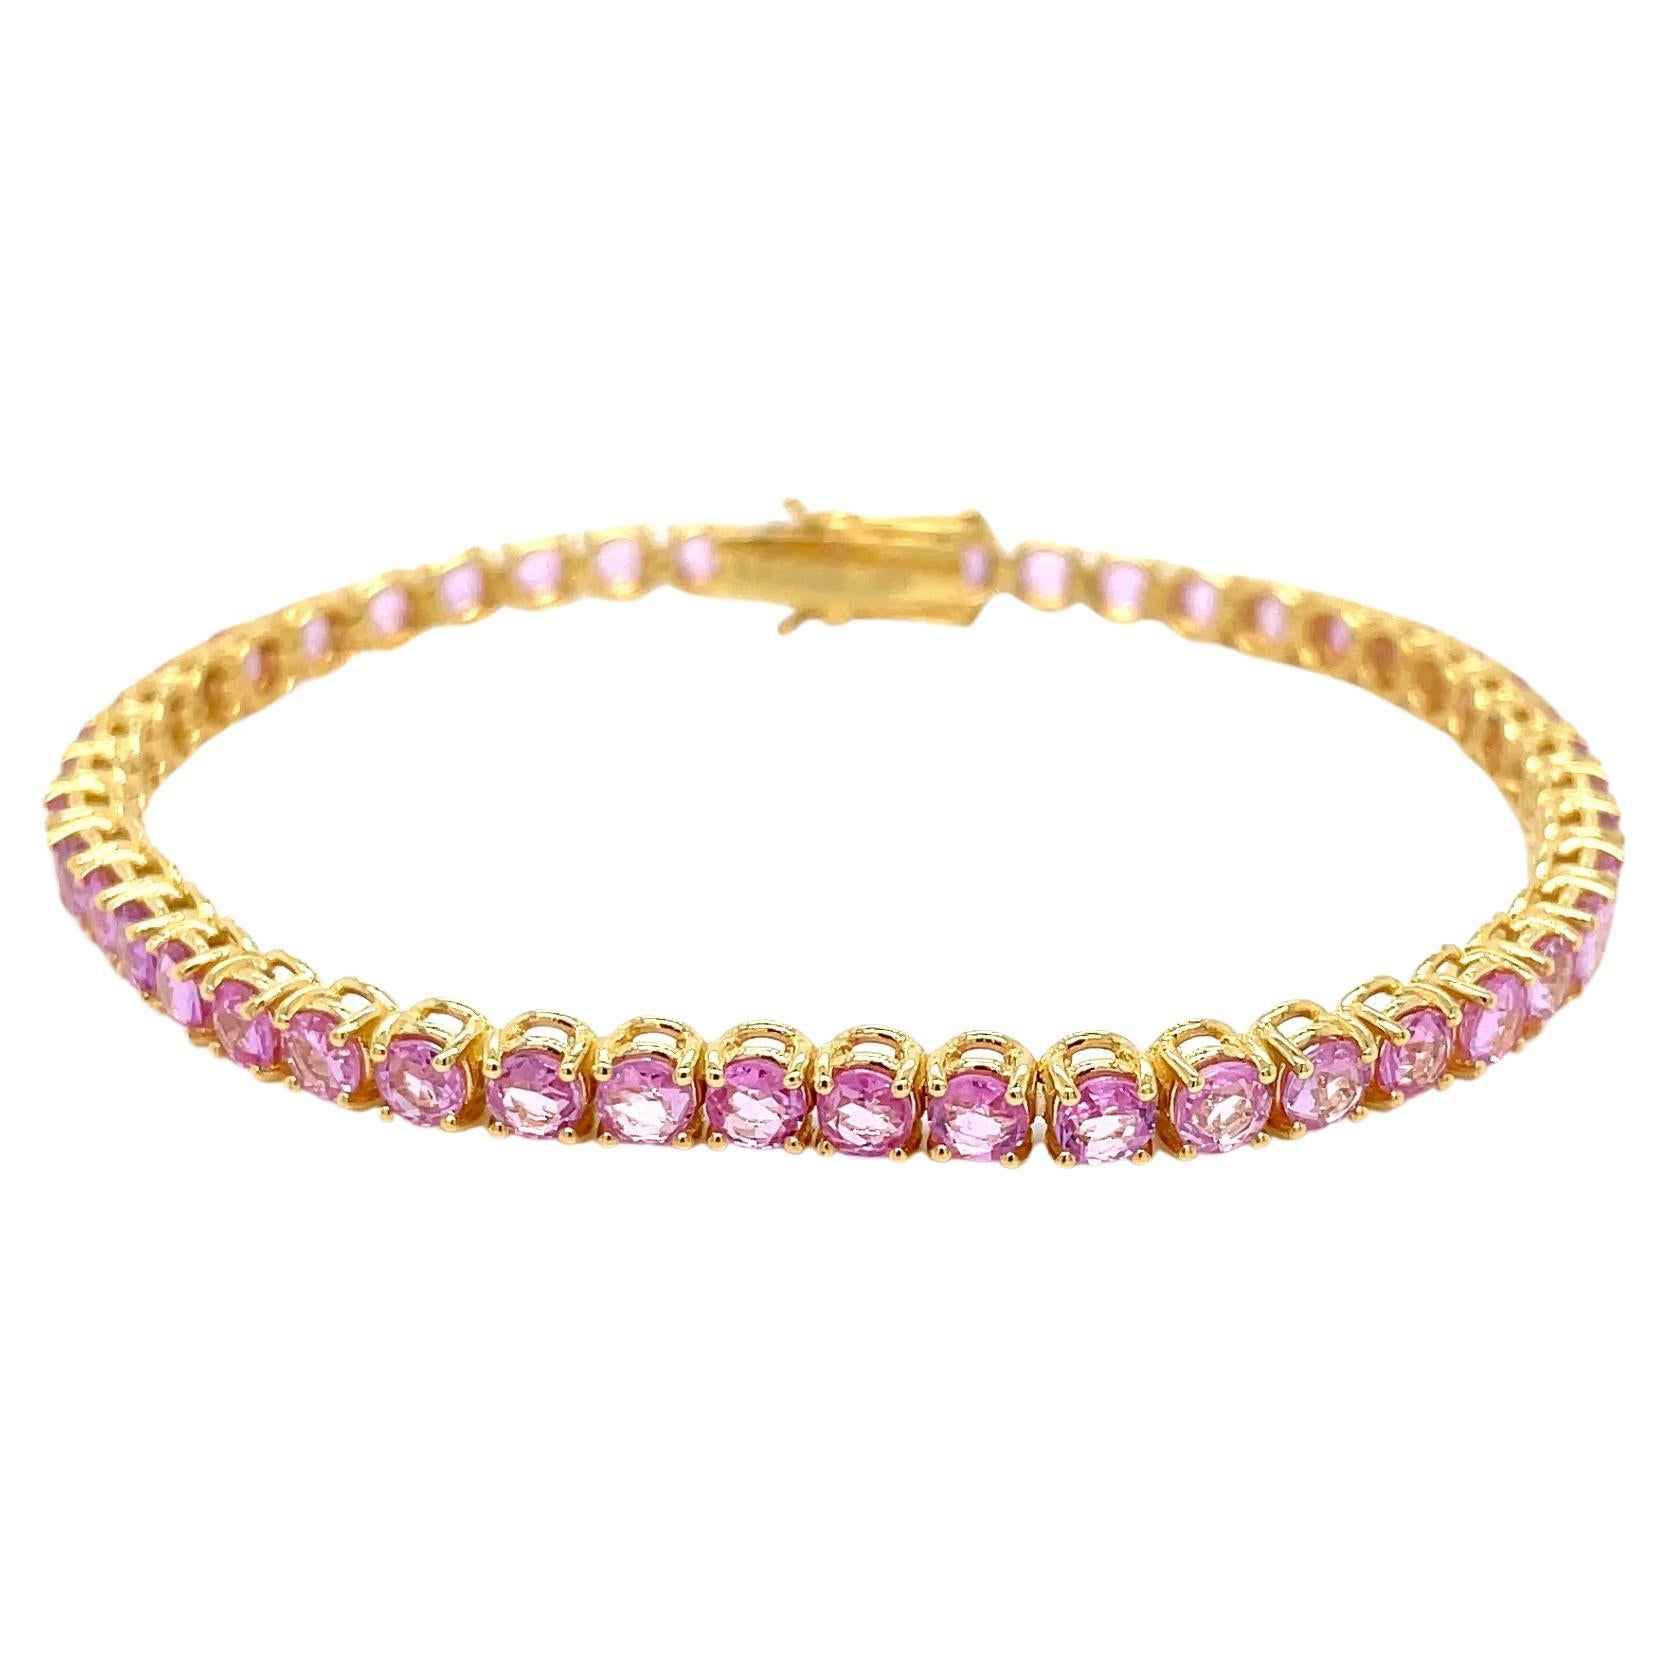 10 Carat Natural Pink Sapphire Yellow Gold Tennis Bracelet For Sale